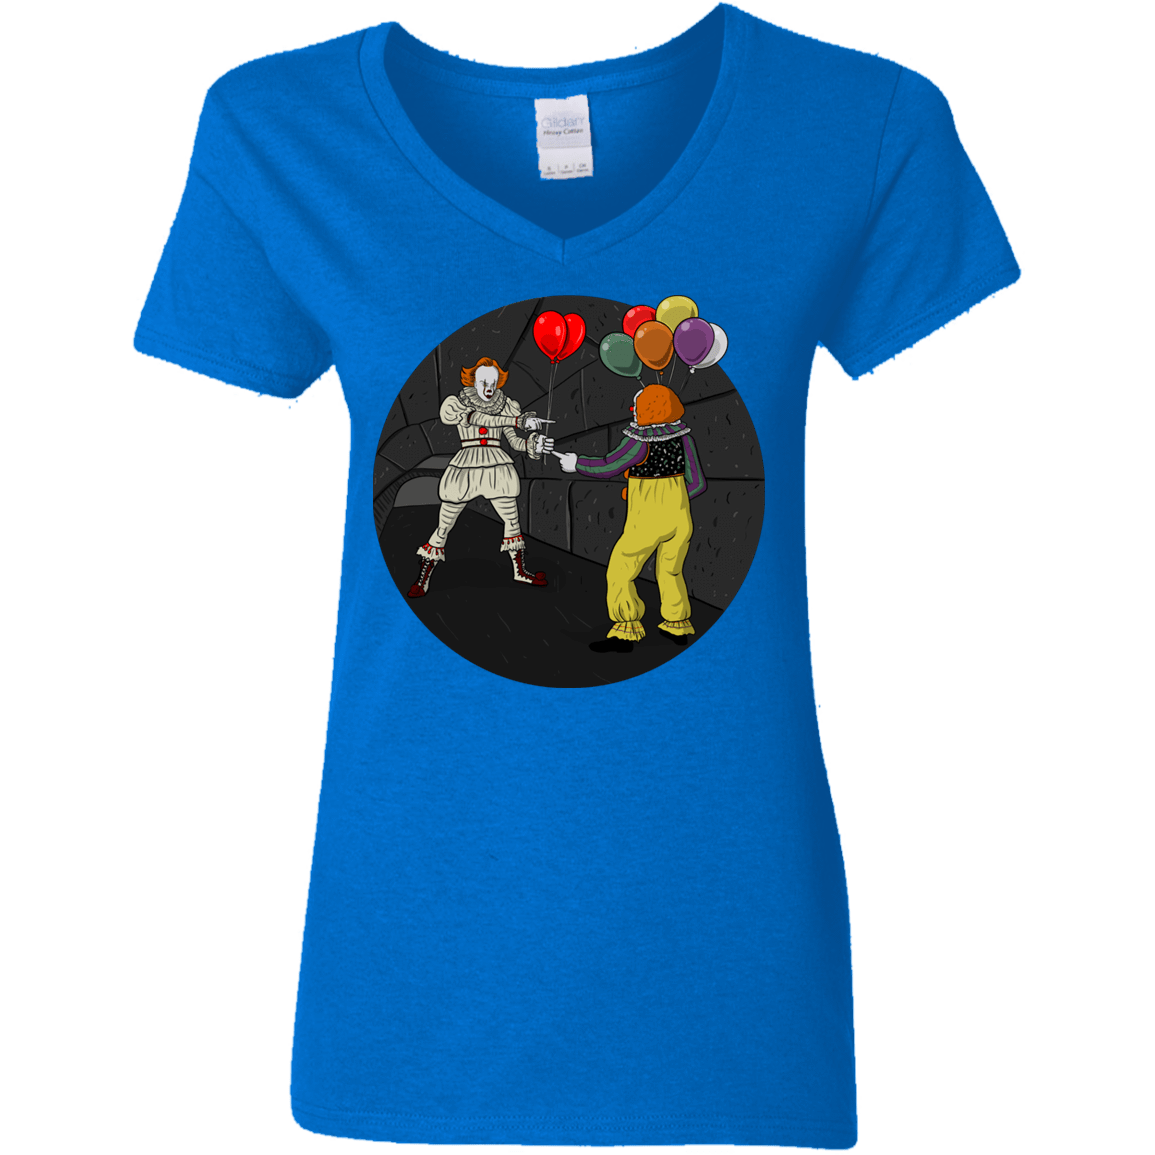 T-Shirts Royal / S 2 Pennywise Women's V-Neck T-Shirt